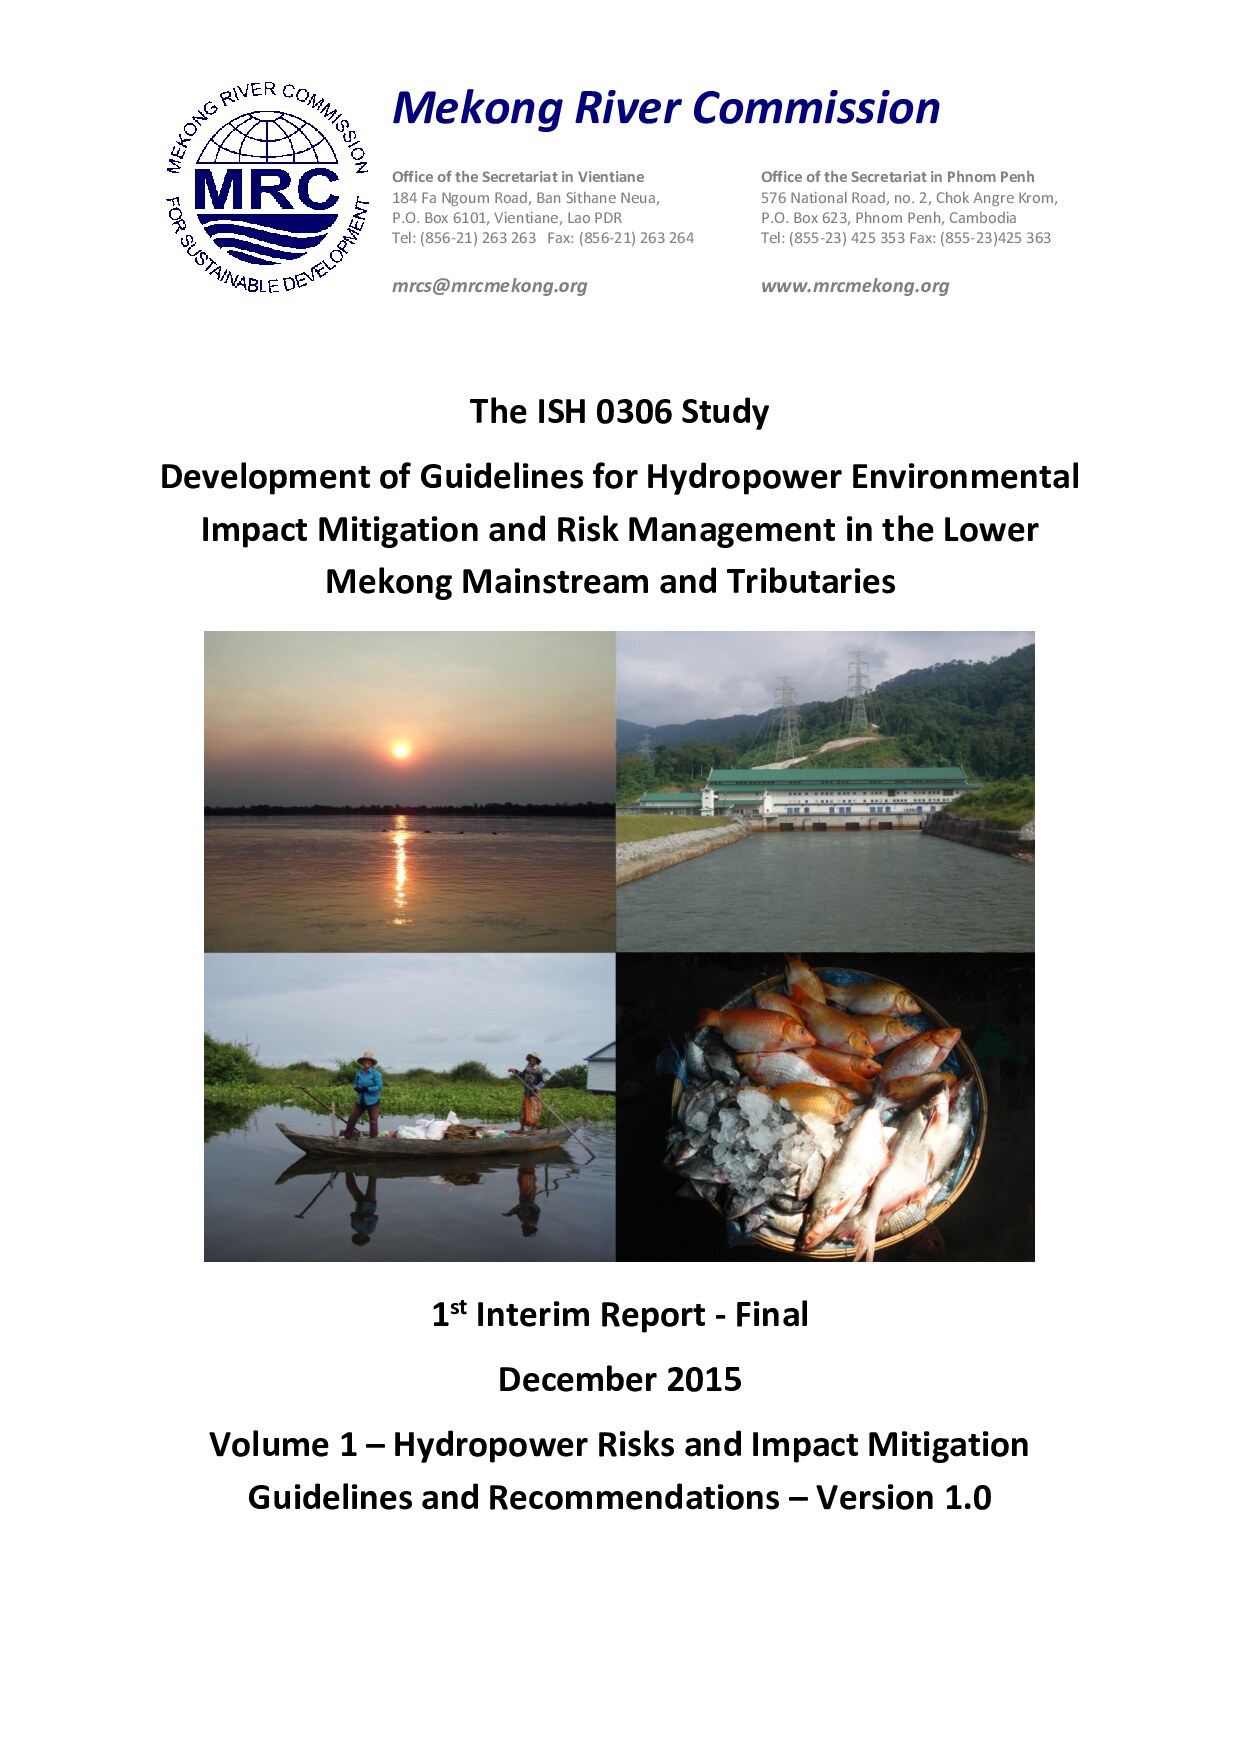 Development of Guidelines for Hydropower Environmental Impact Mitigation and Risk Management in the Lower Mekong Mainstream and Tributaries 1st Interim Report – Final: Vol.1